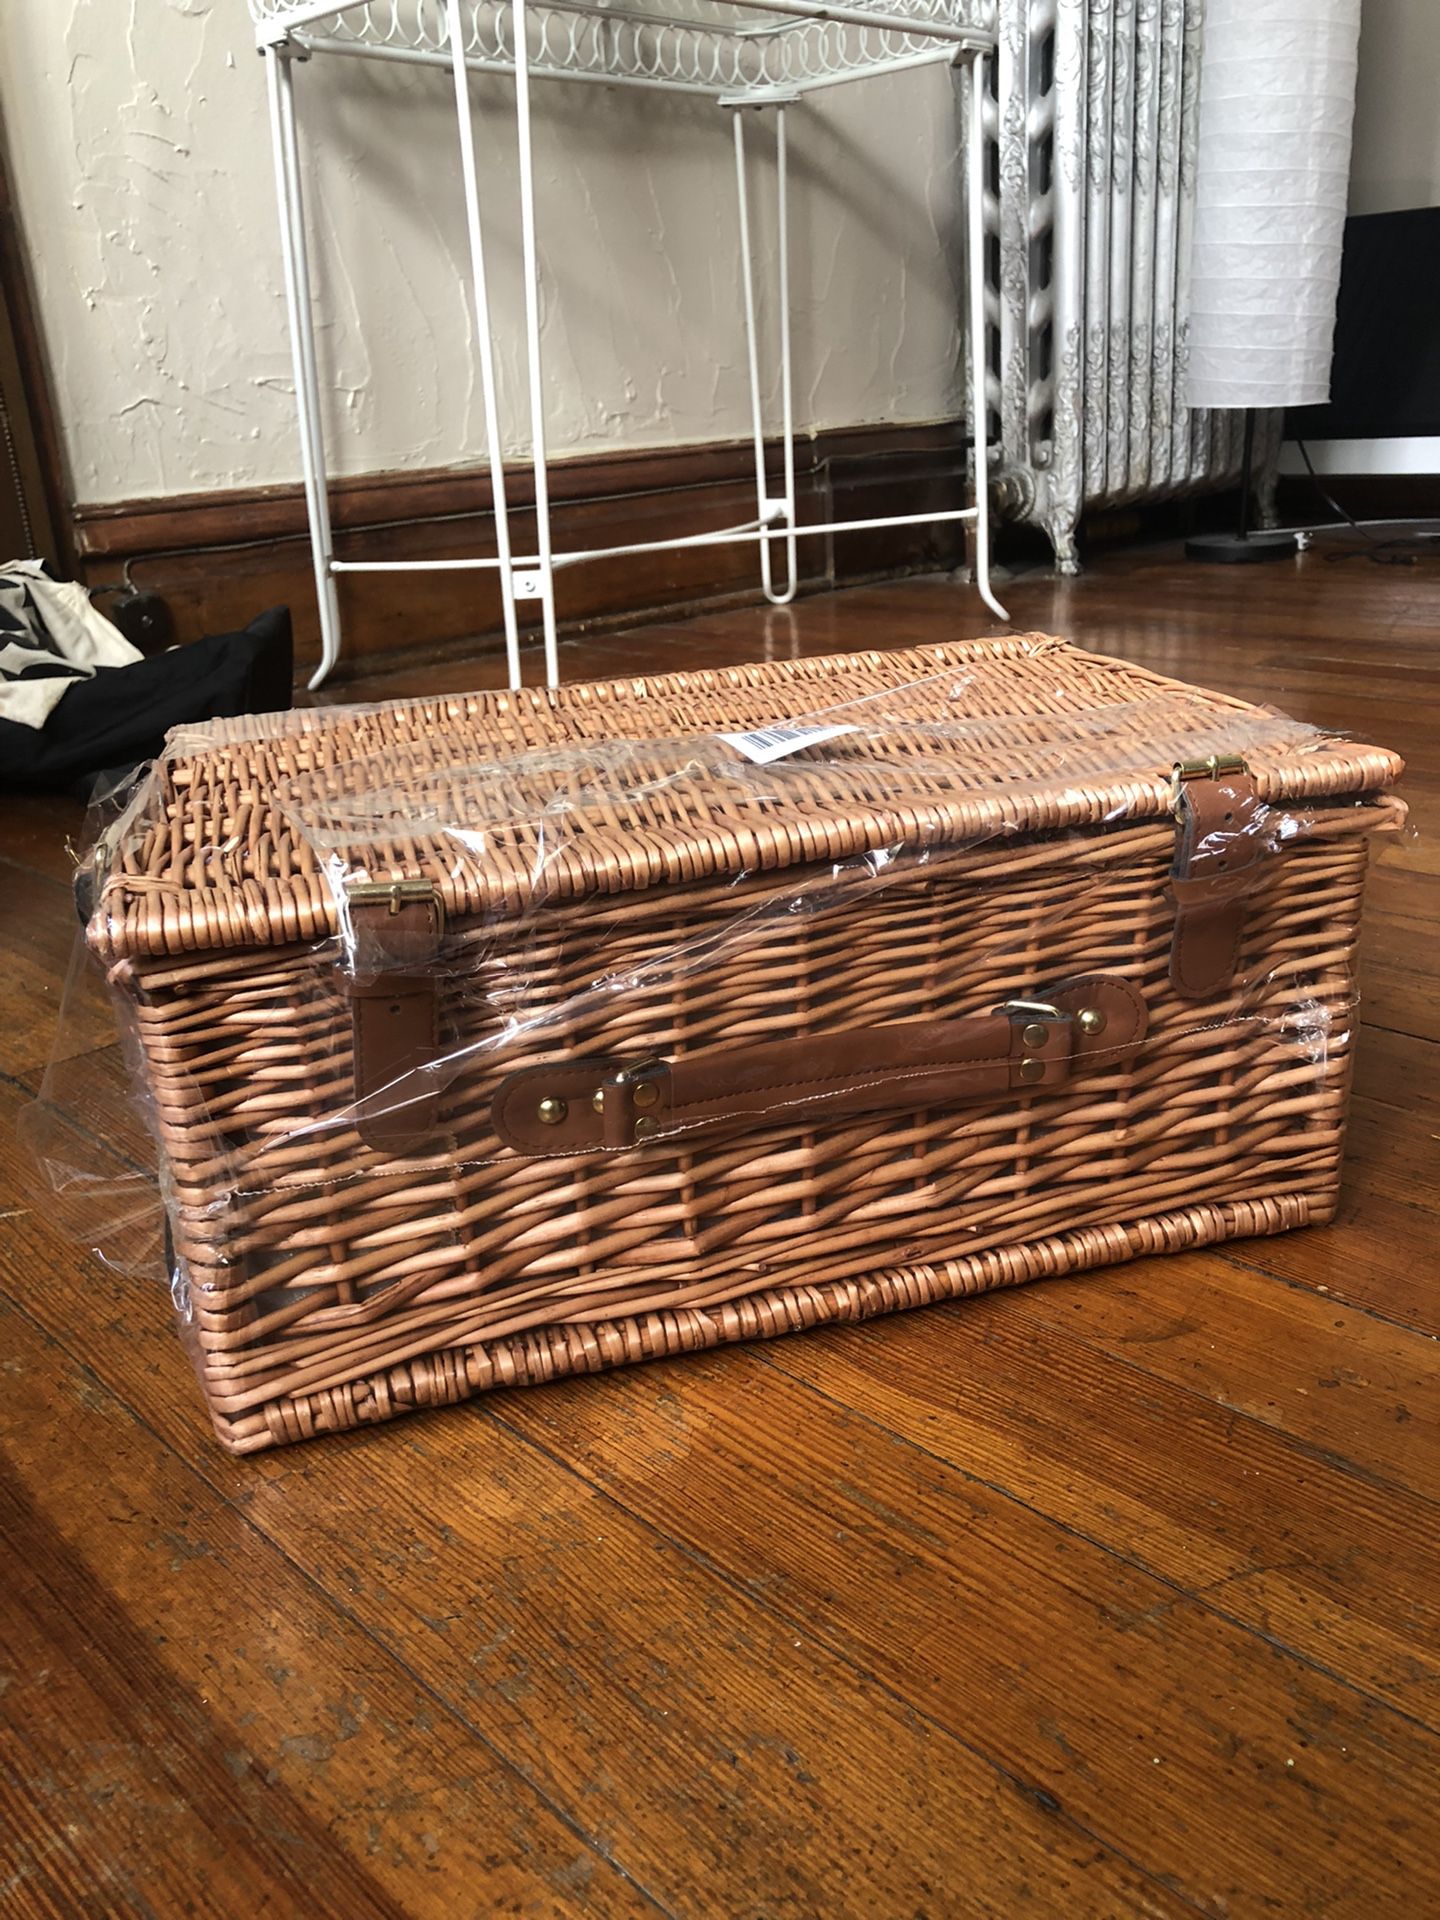 UNOPENED 4 Person Picnic Basket